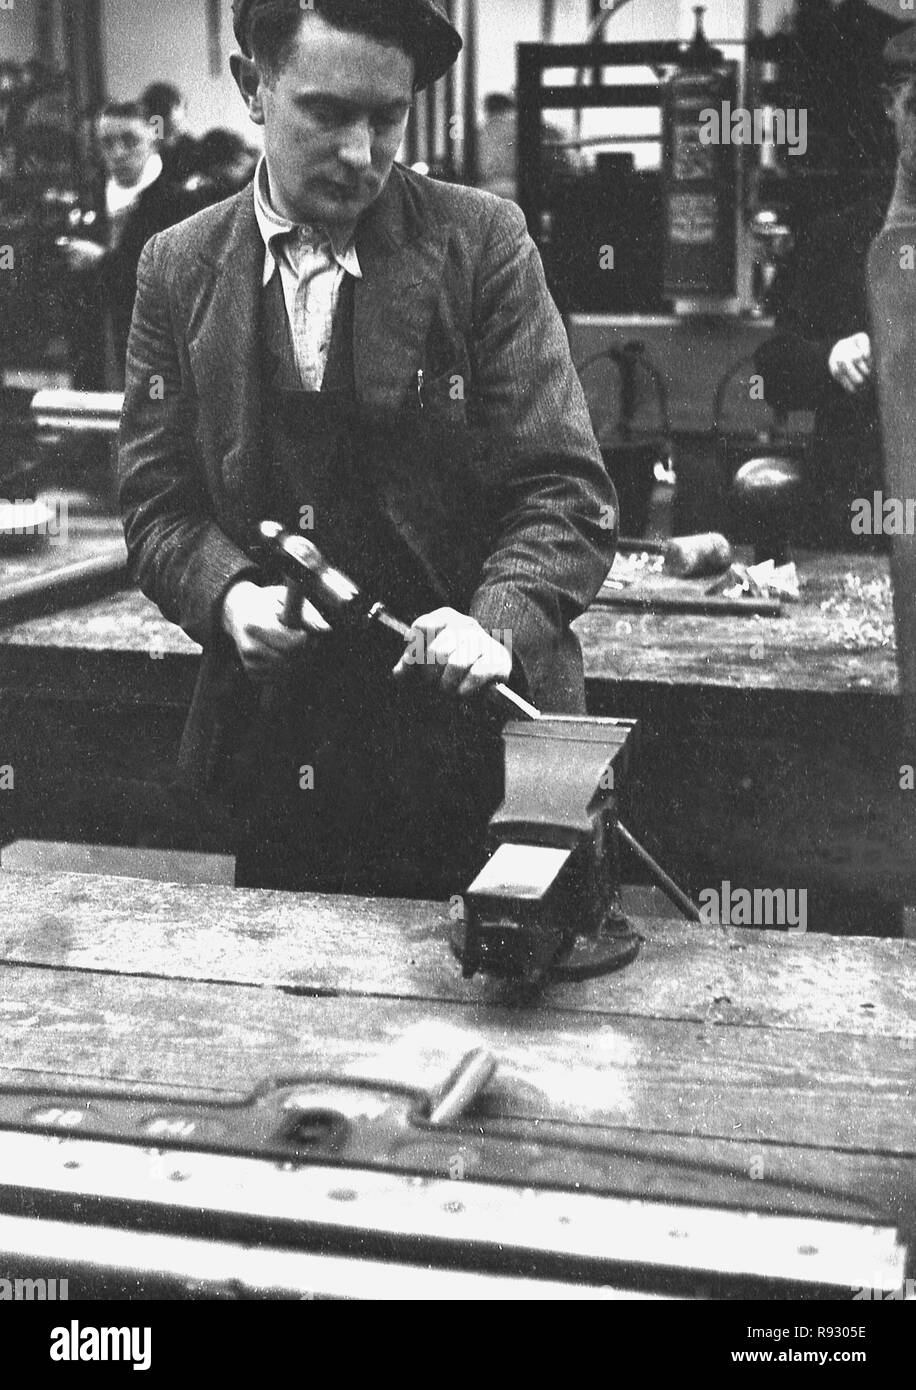 1940s, historical, inside a workshop, at a workbench, an unemployed Welsh miner learning a new skill of metalwork, Merthyr, Wales. Stock Photo